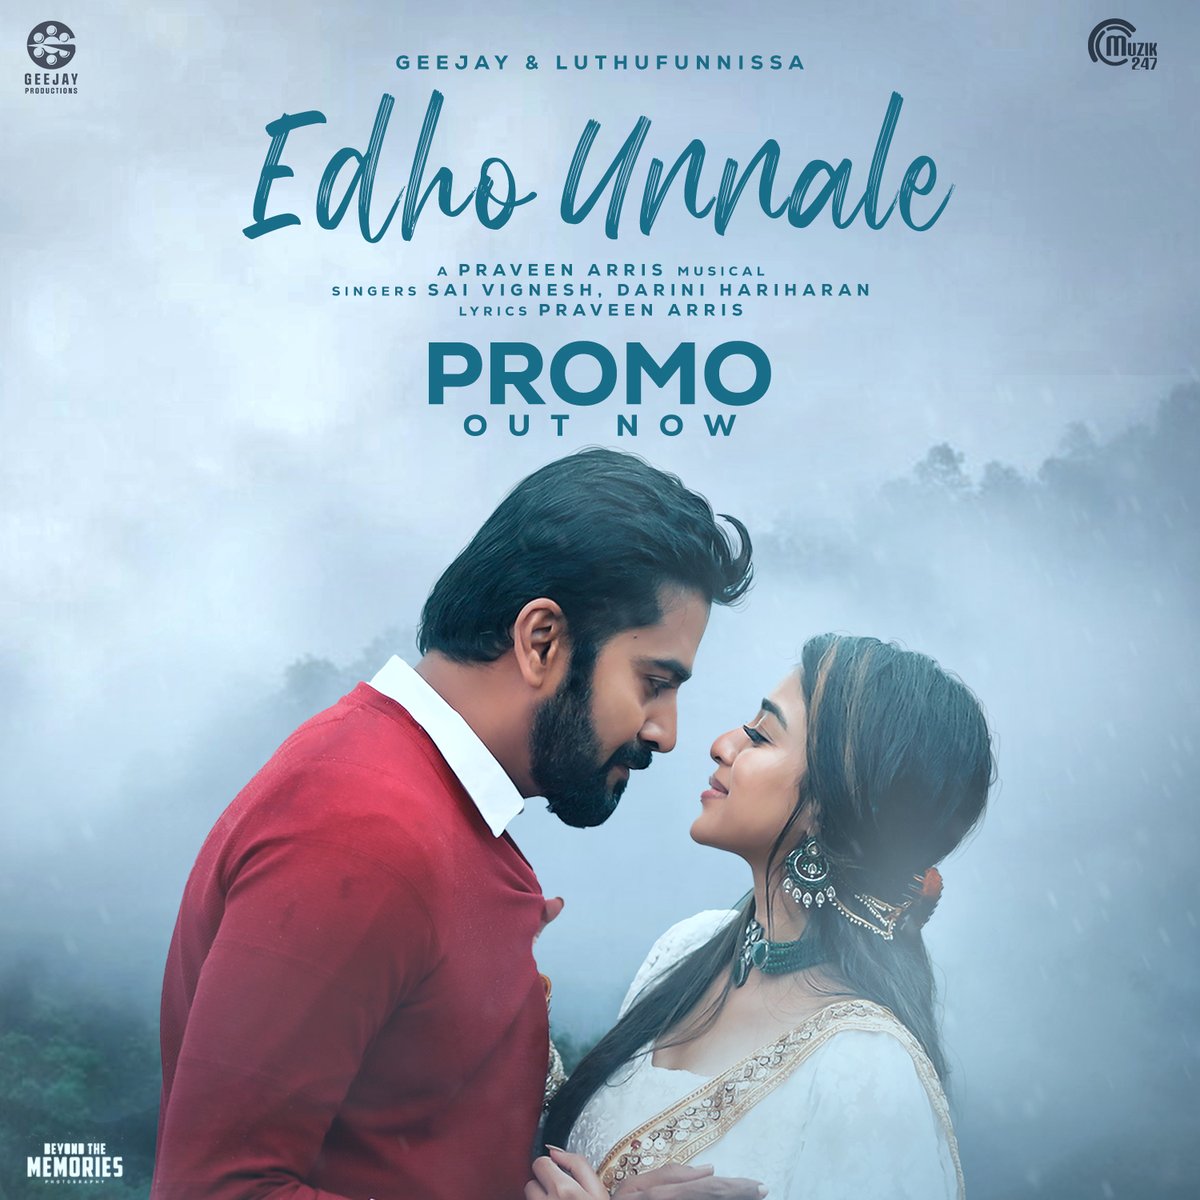 The song promo of #EdhoUnnale ft. @actorgeejay, #Luthufunnissa is OUT NOW!🥰🎶 youtu.be/ghpje_NITUs Full Song out on 15th Dec 6 PM! @arris_pronaw @PraveenKum86924 @saivigneshsings #darini @U1arun_Director @_ganesh_film @onlynikil @Muzik247in